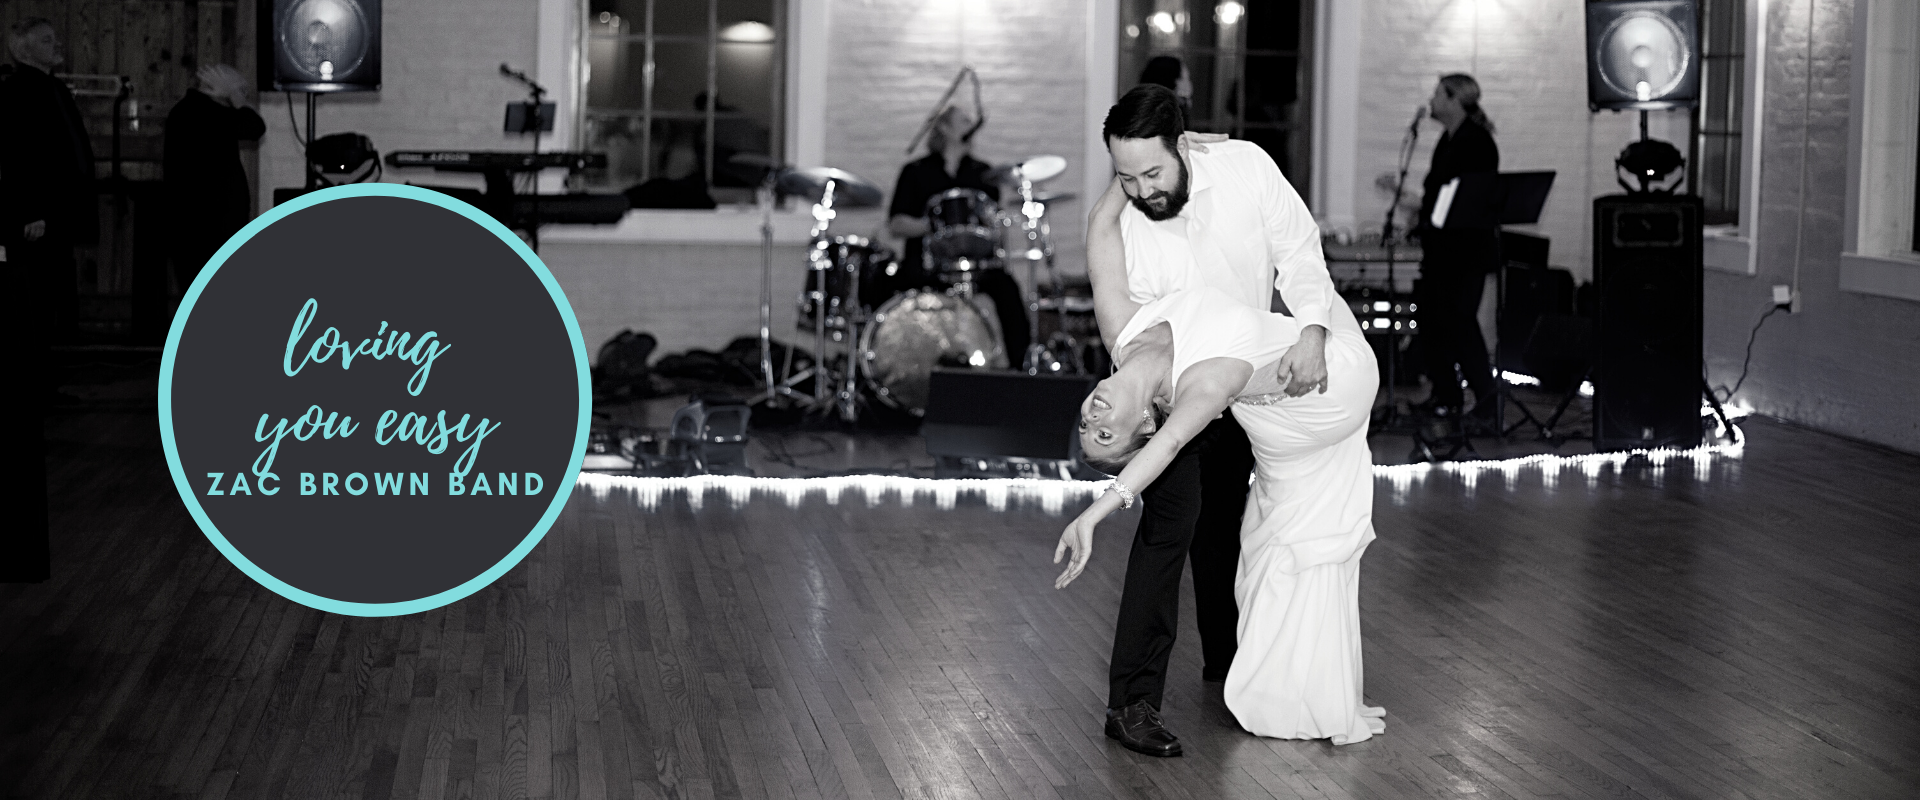 loving you easy zac brown band wedding first dance choreography tutorial for beginners